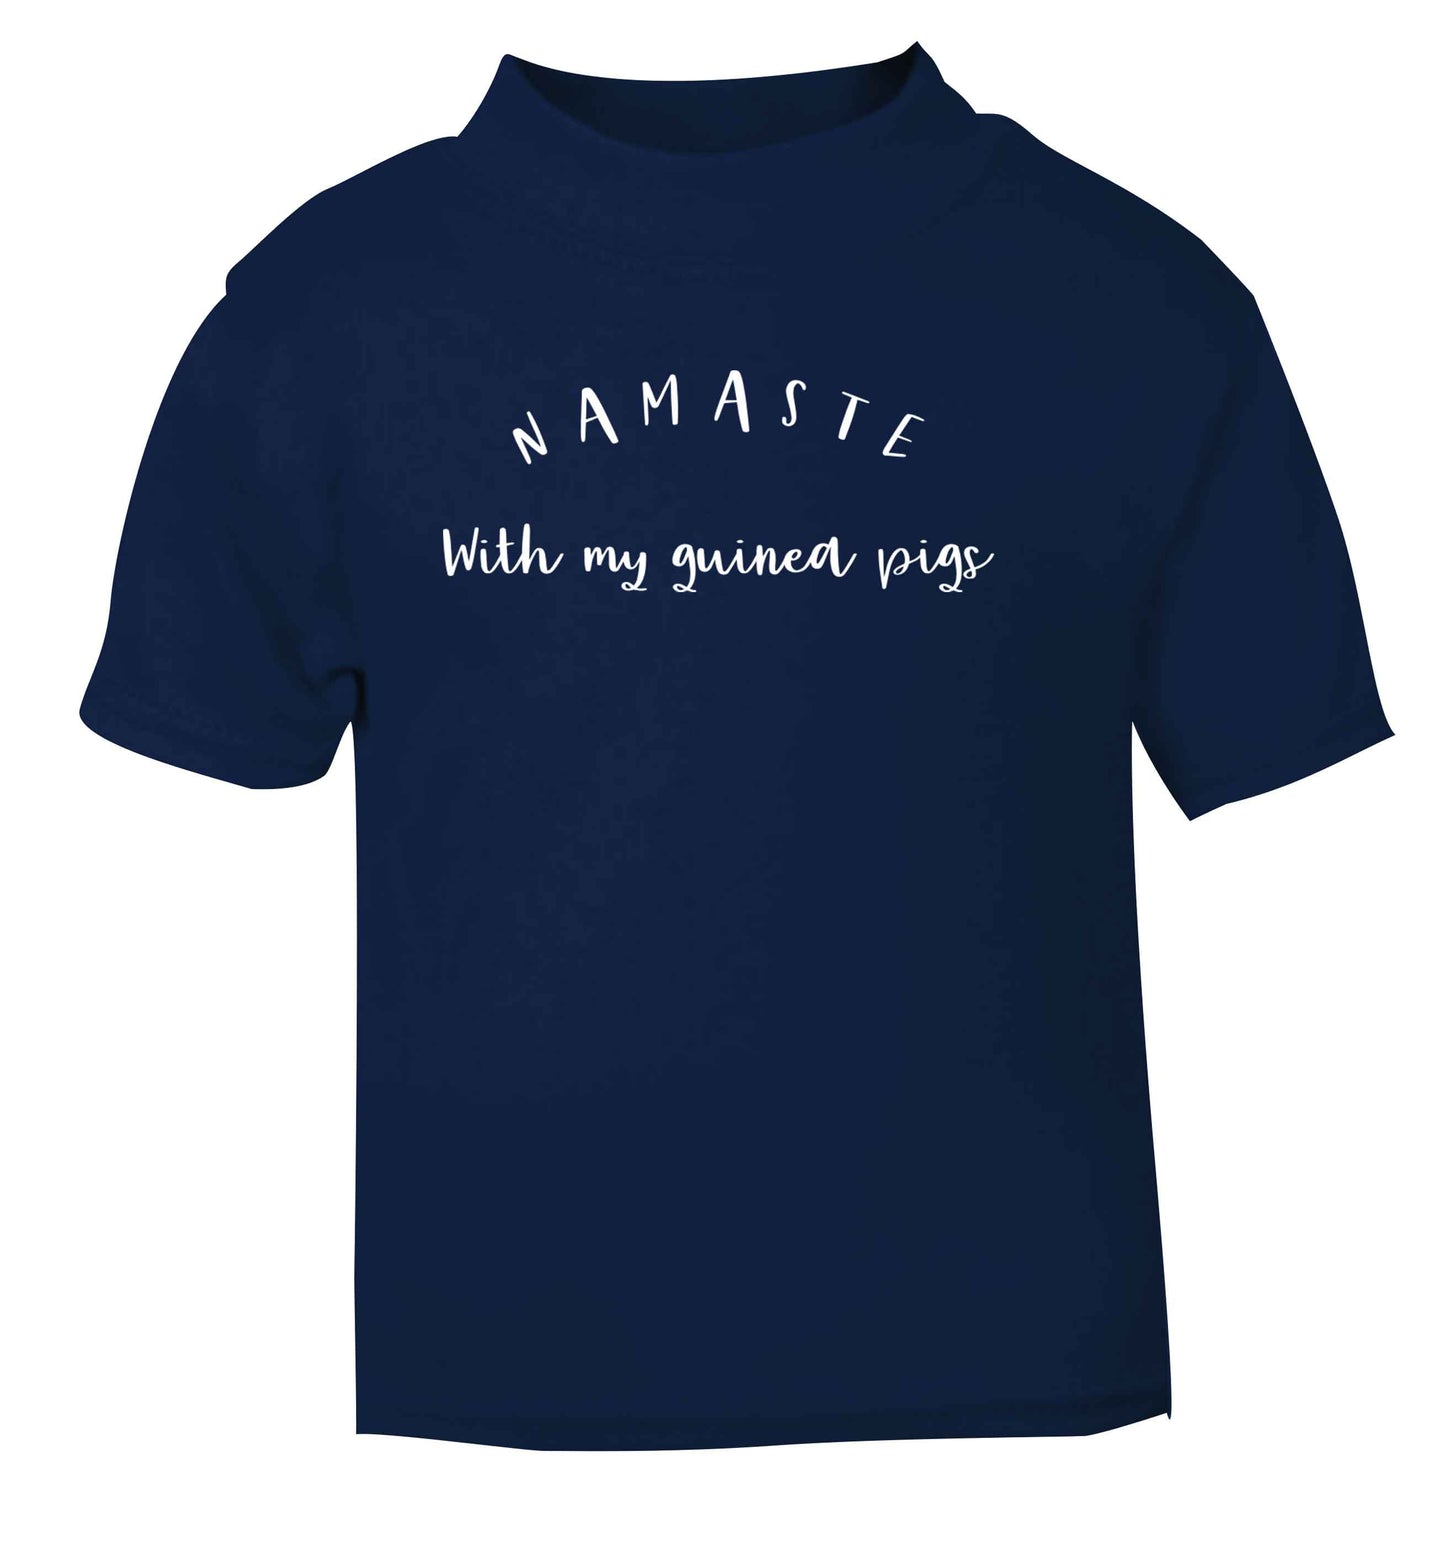 Namaste with my guinea pigs navy Baby Toddler Tshirt 2 Years